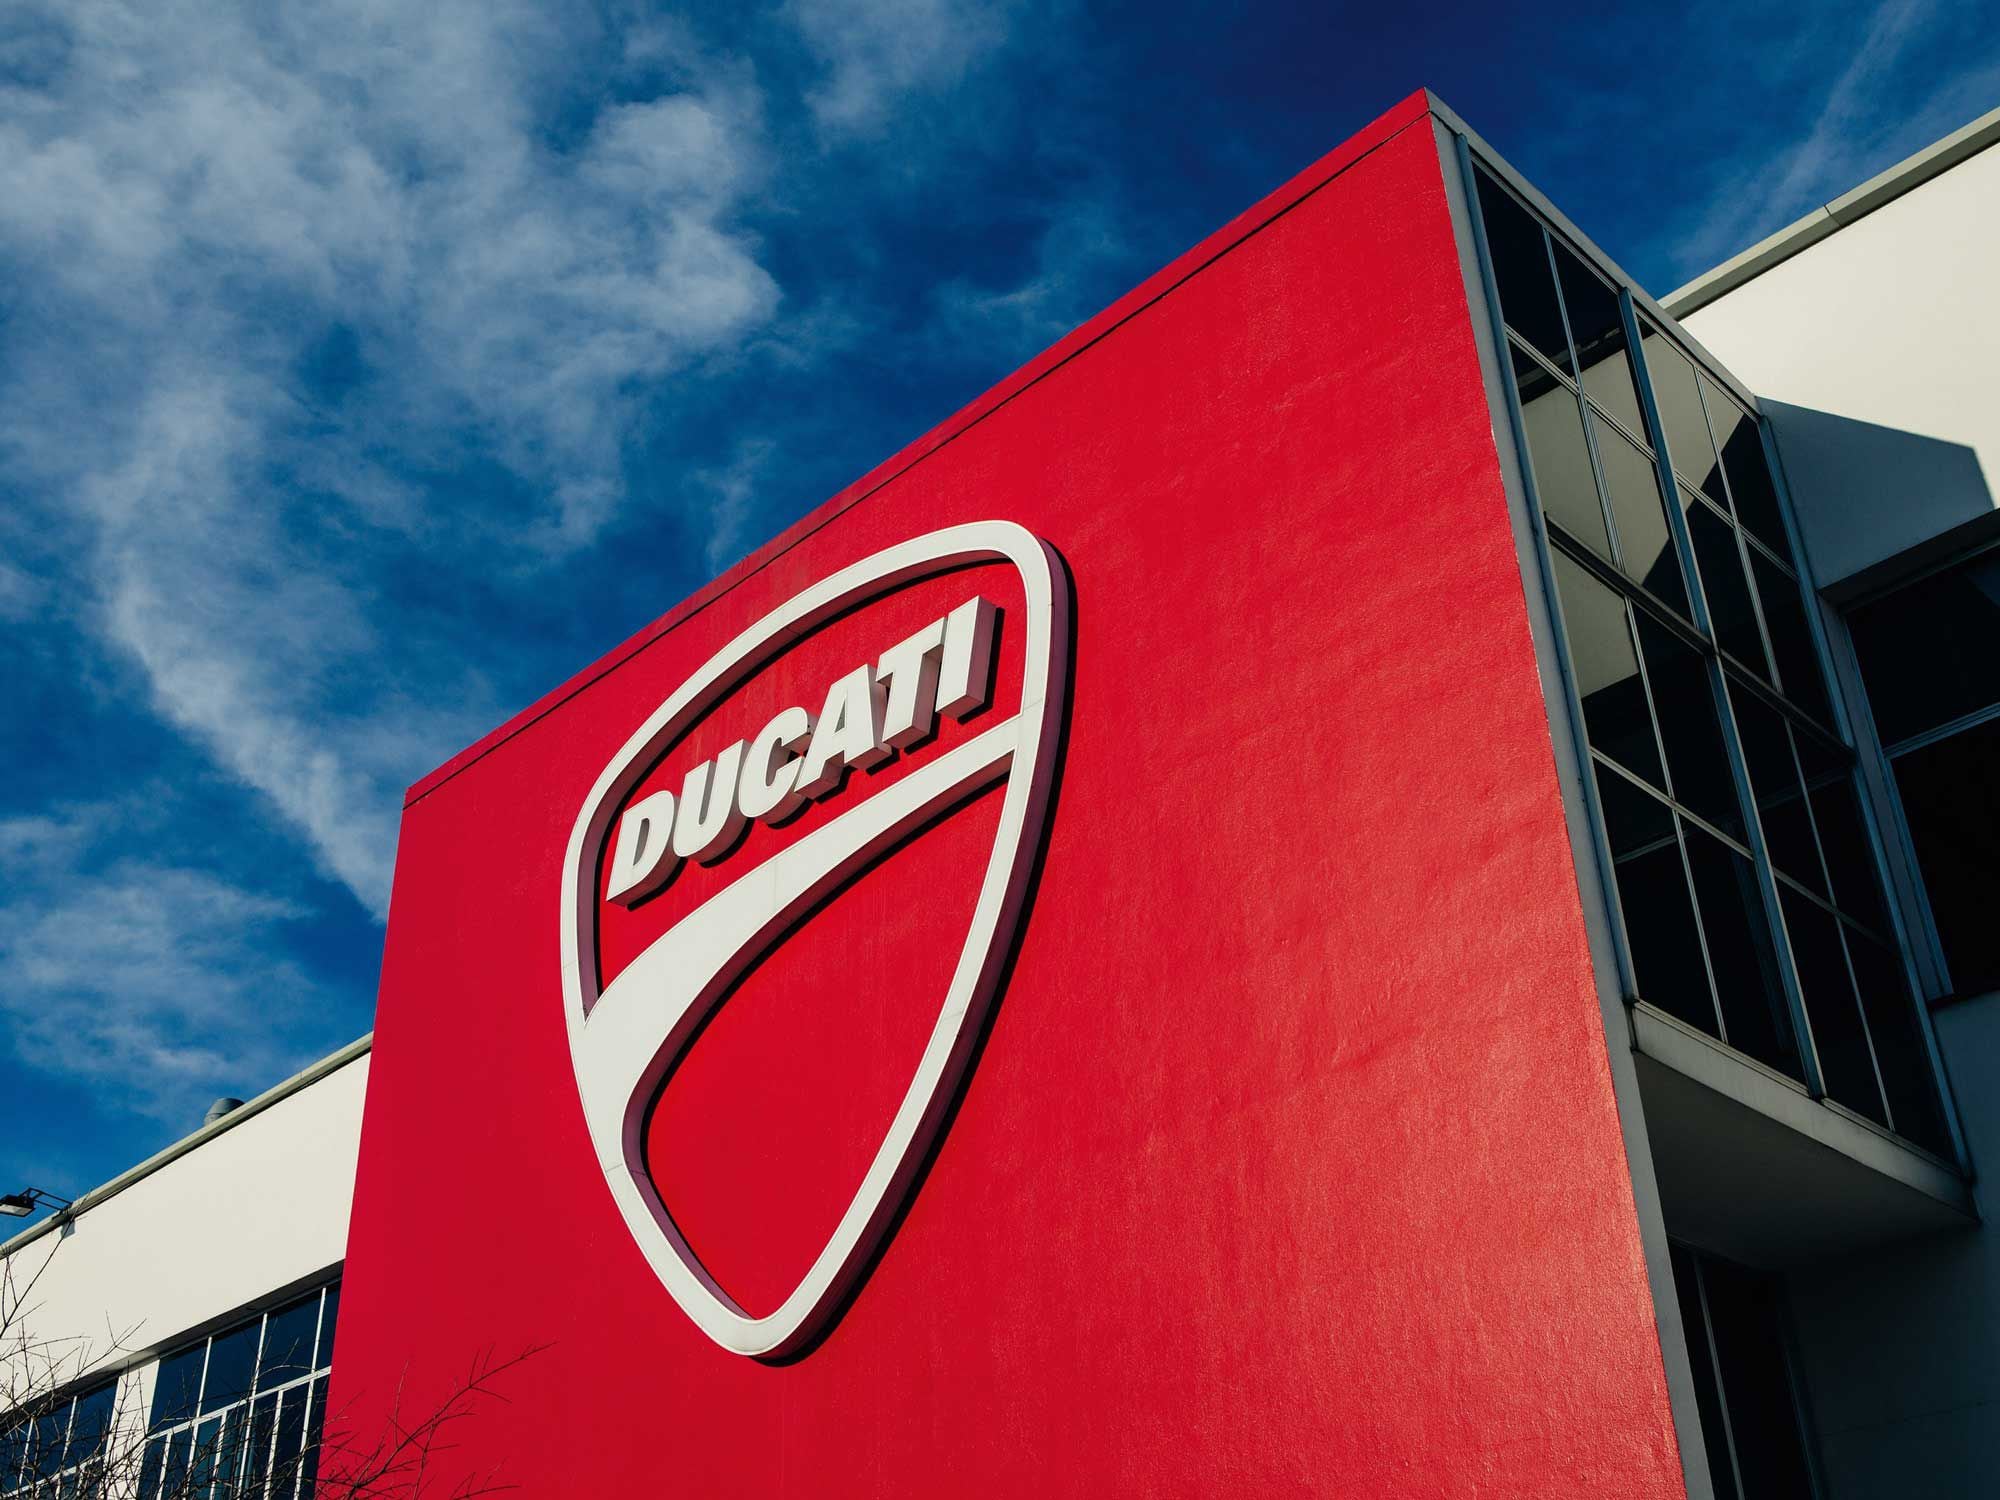 The Ducati headquarters in Borgo Panigale is where the ideas became a reality for the 2021 record-breaking year.